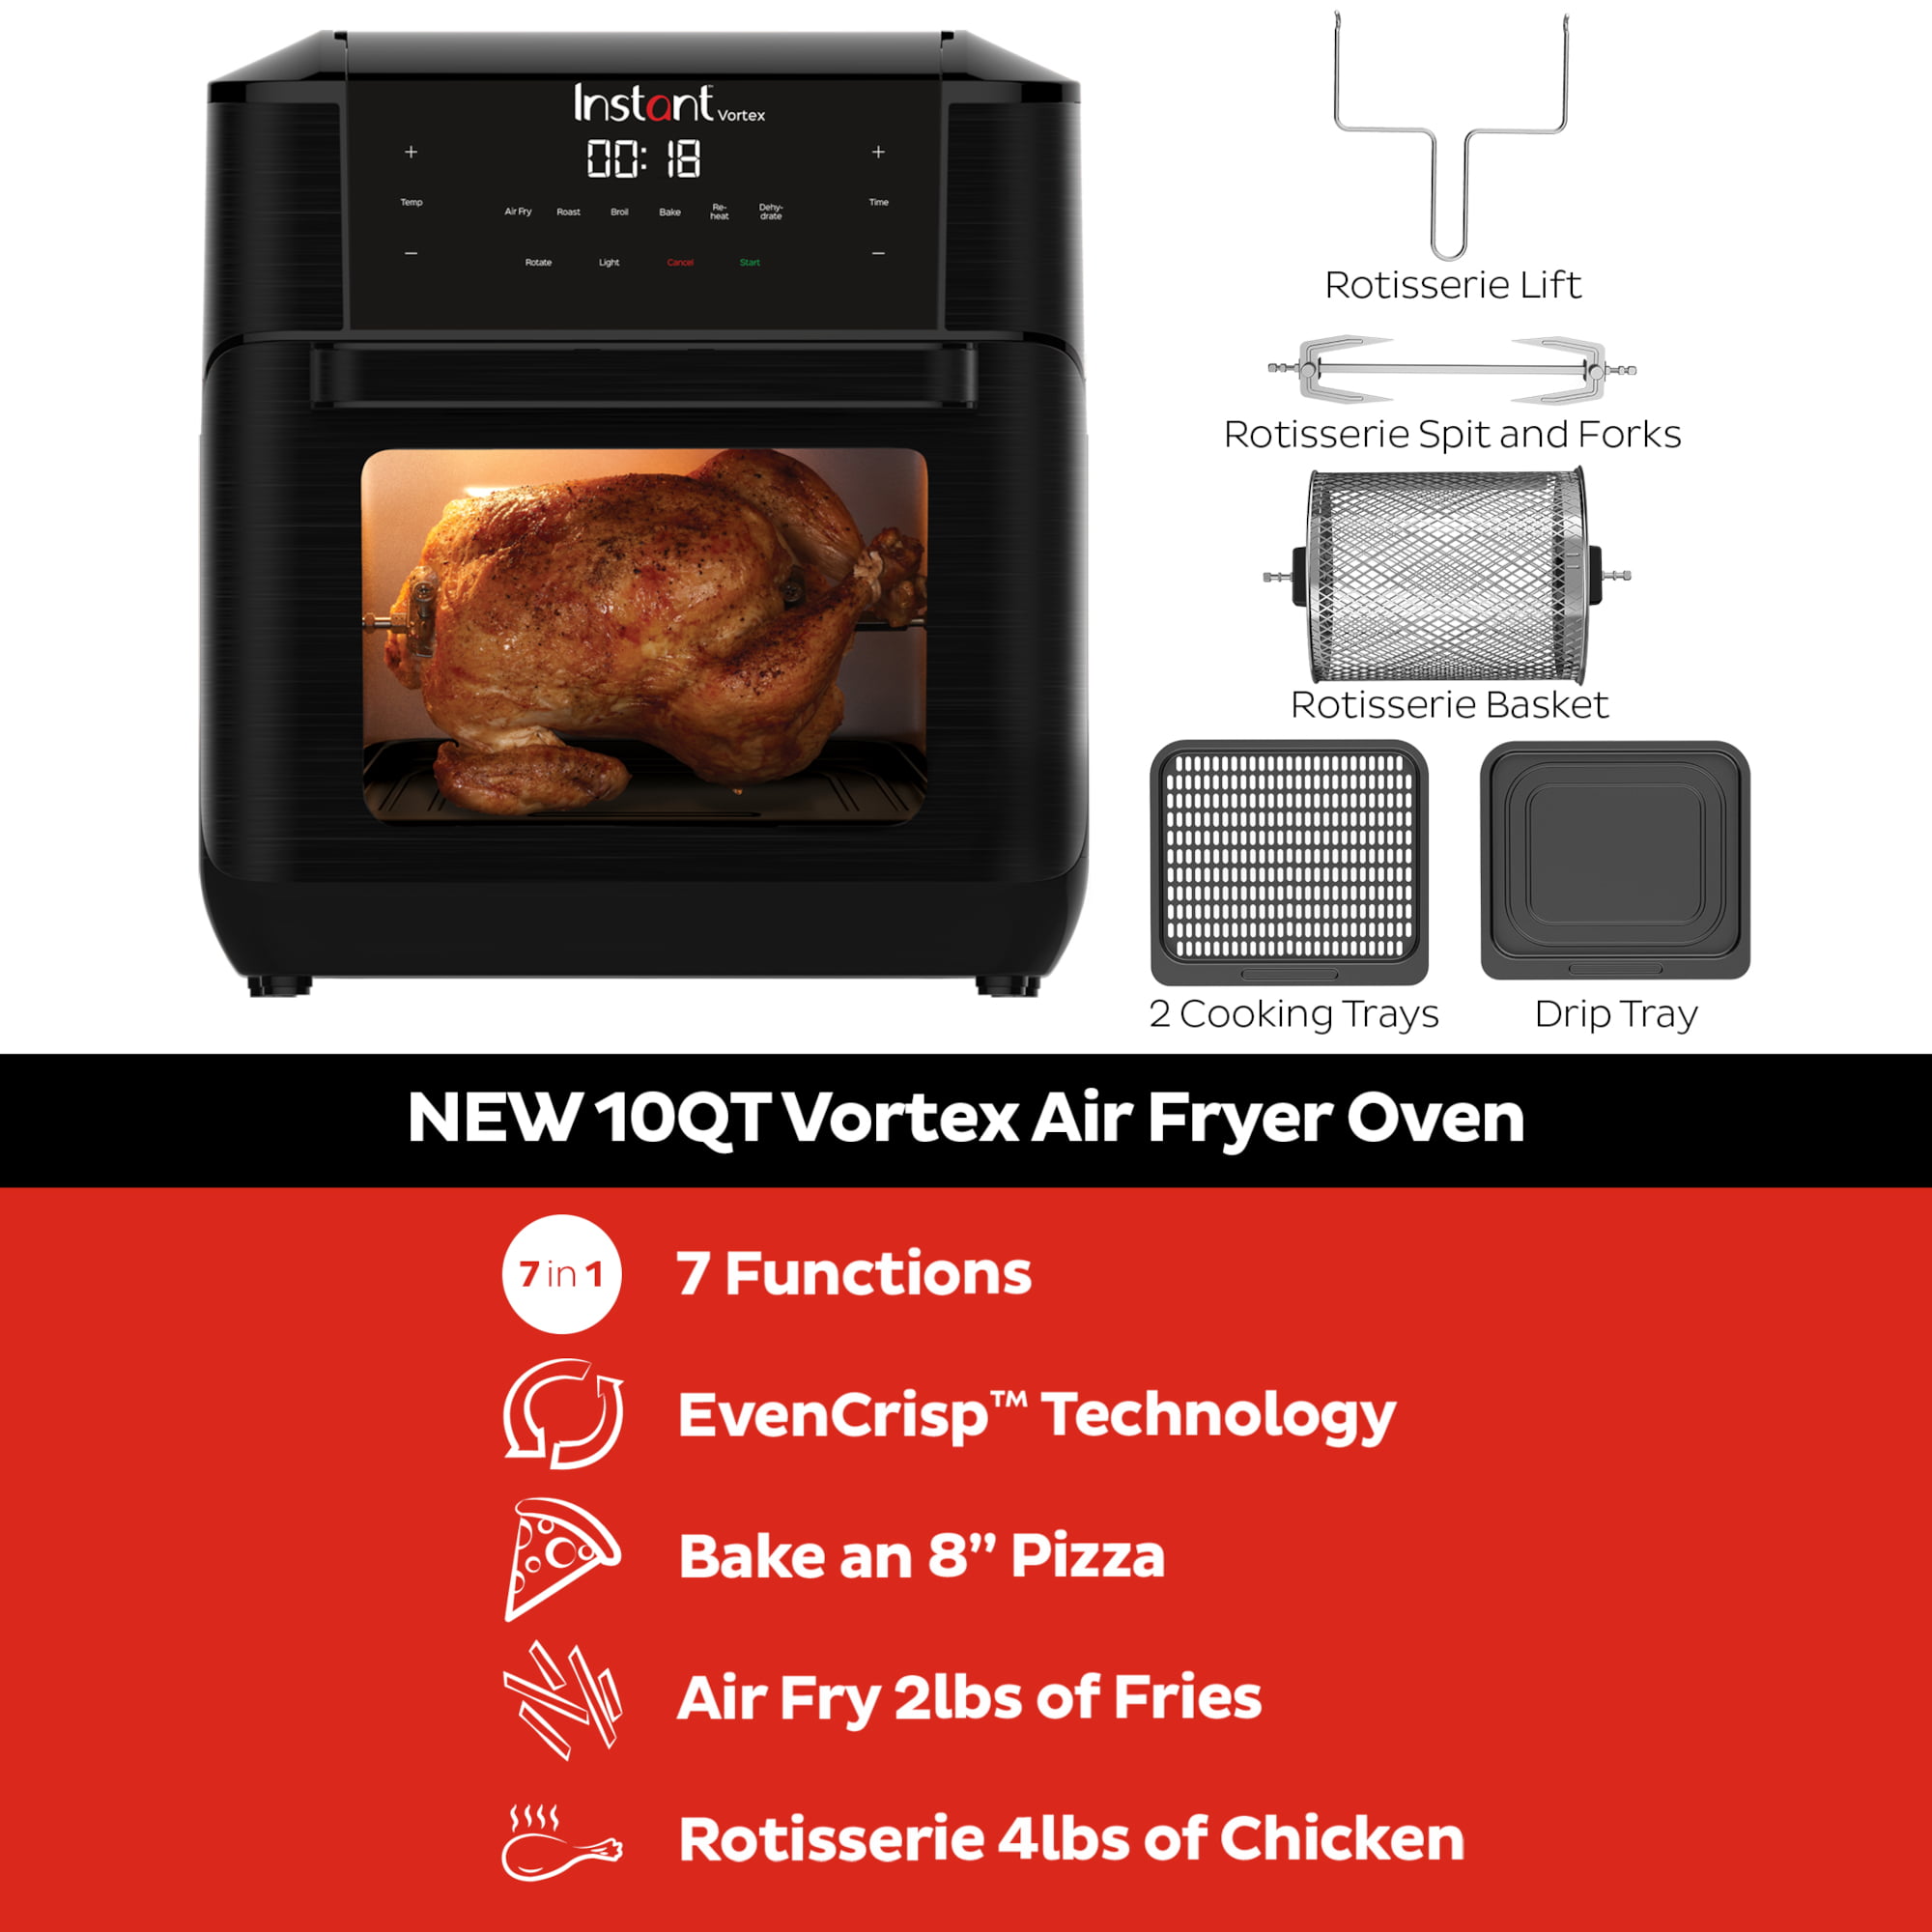 Air Fryer Oven 9 in 1 with Rotisserie, 10 Qt, EvenCrisp Technology